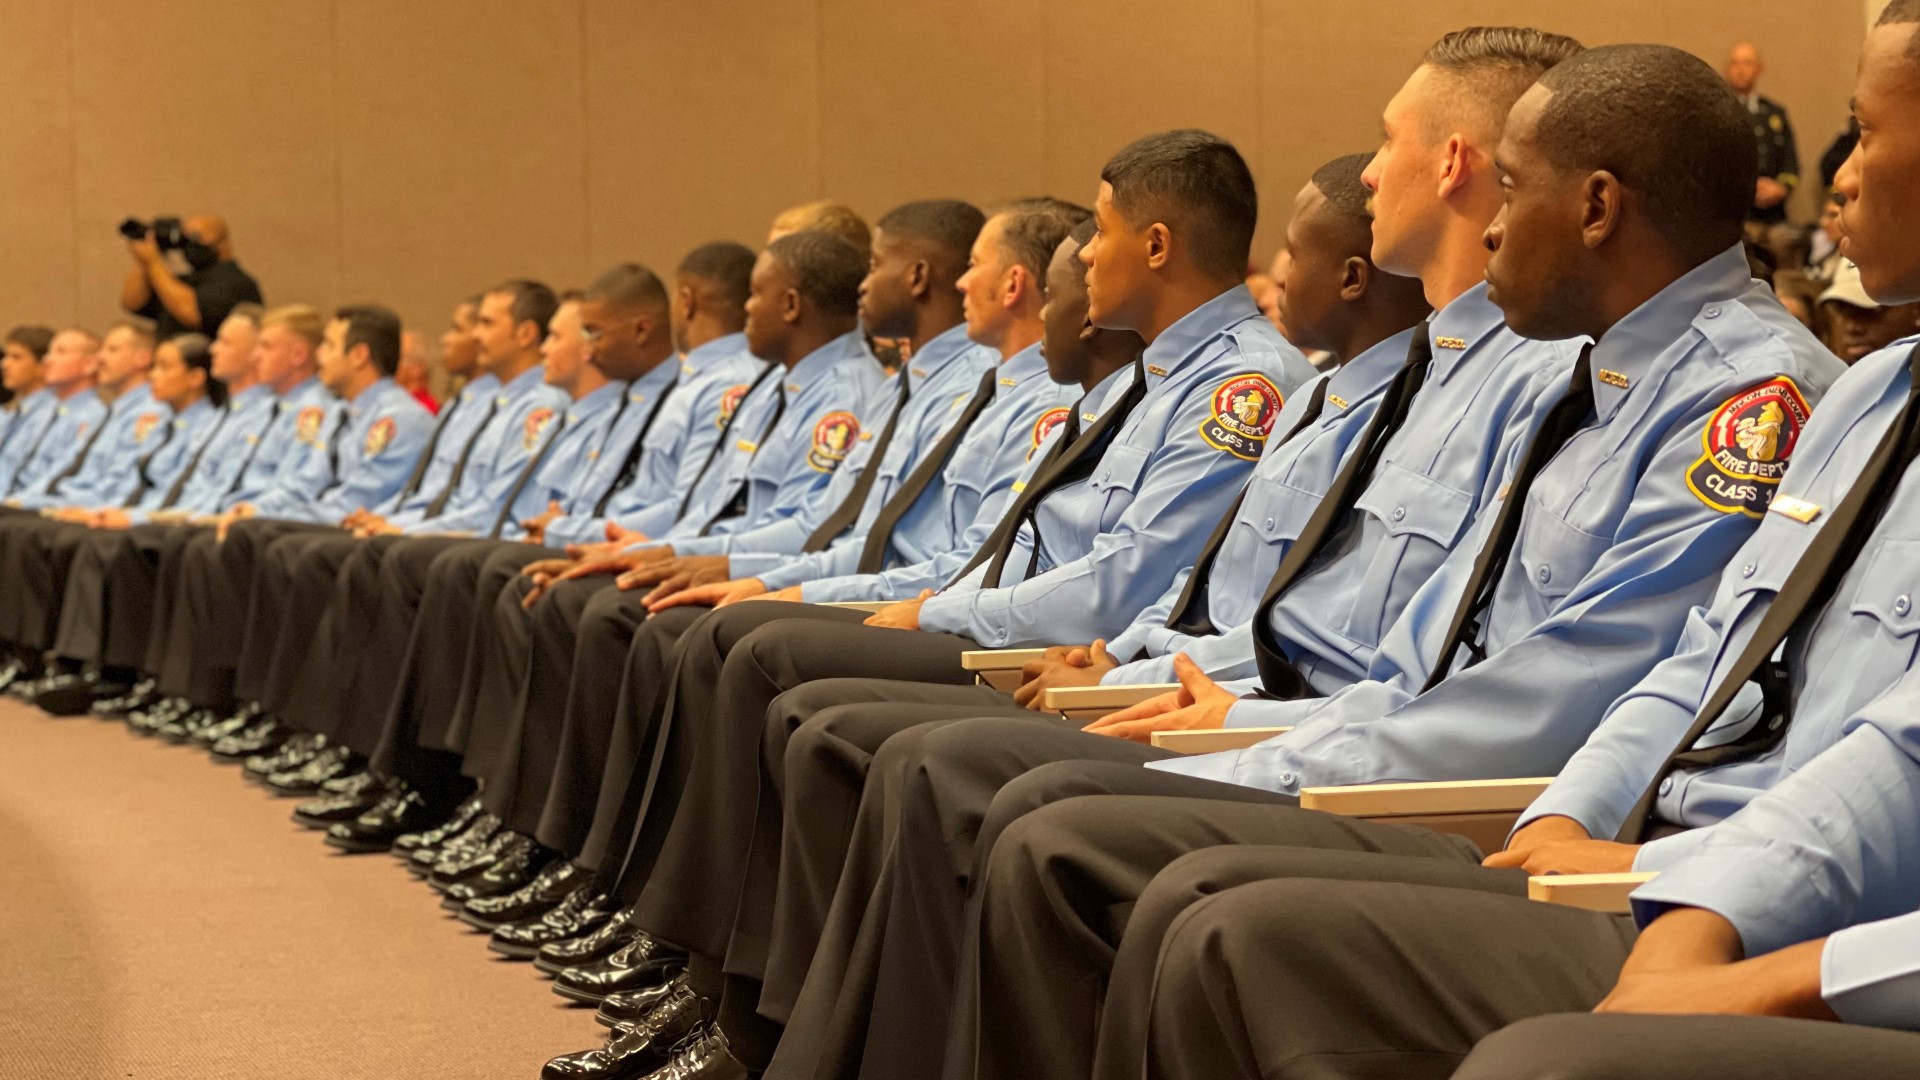 Mayor Lester Miller was there to speak to the graduates and to wish them well. Congratulations, Recruit Class of Summer 2021!